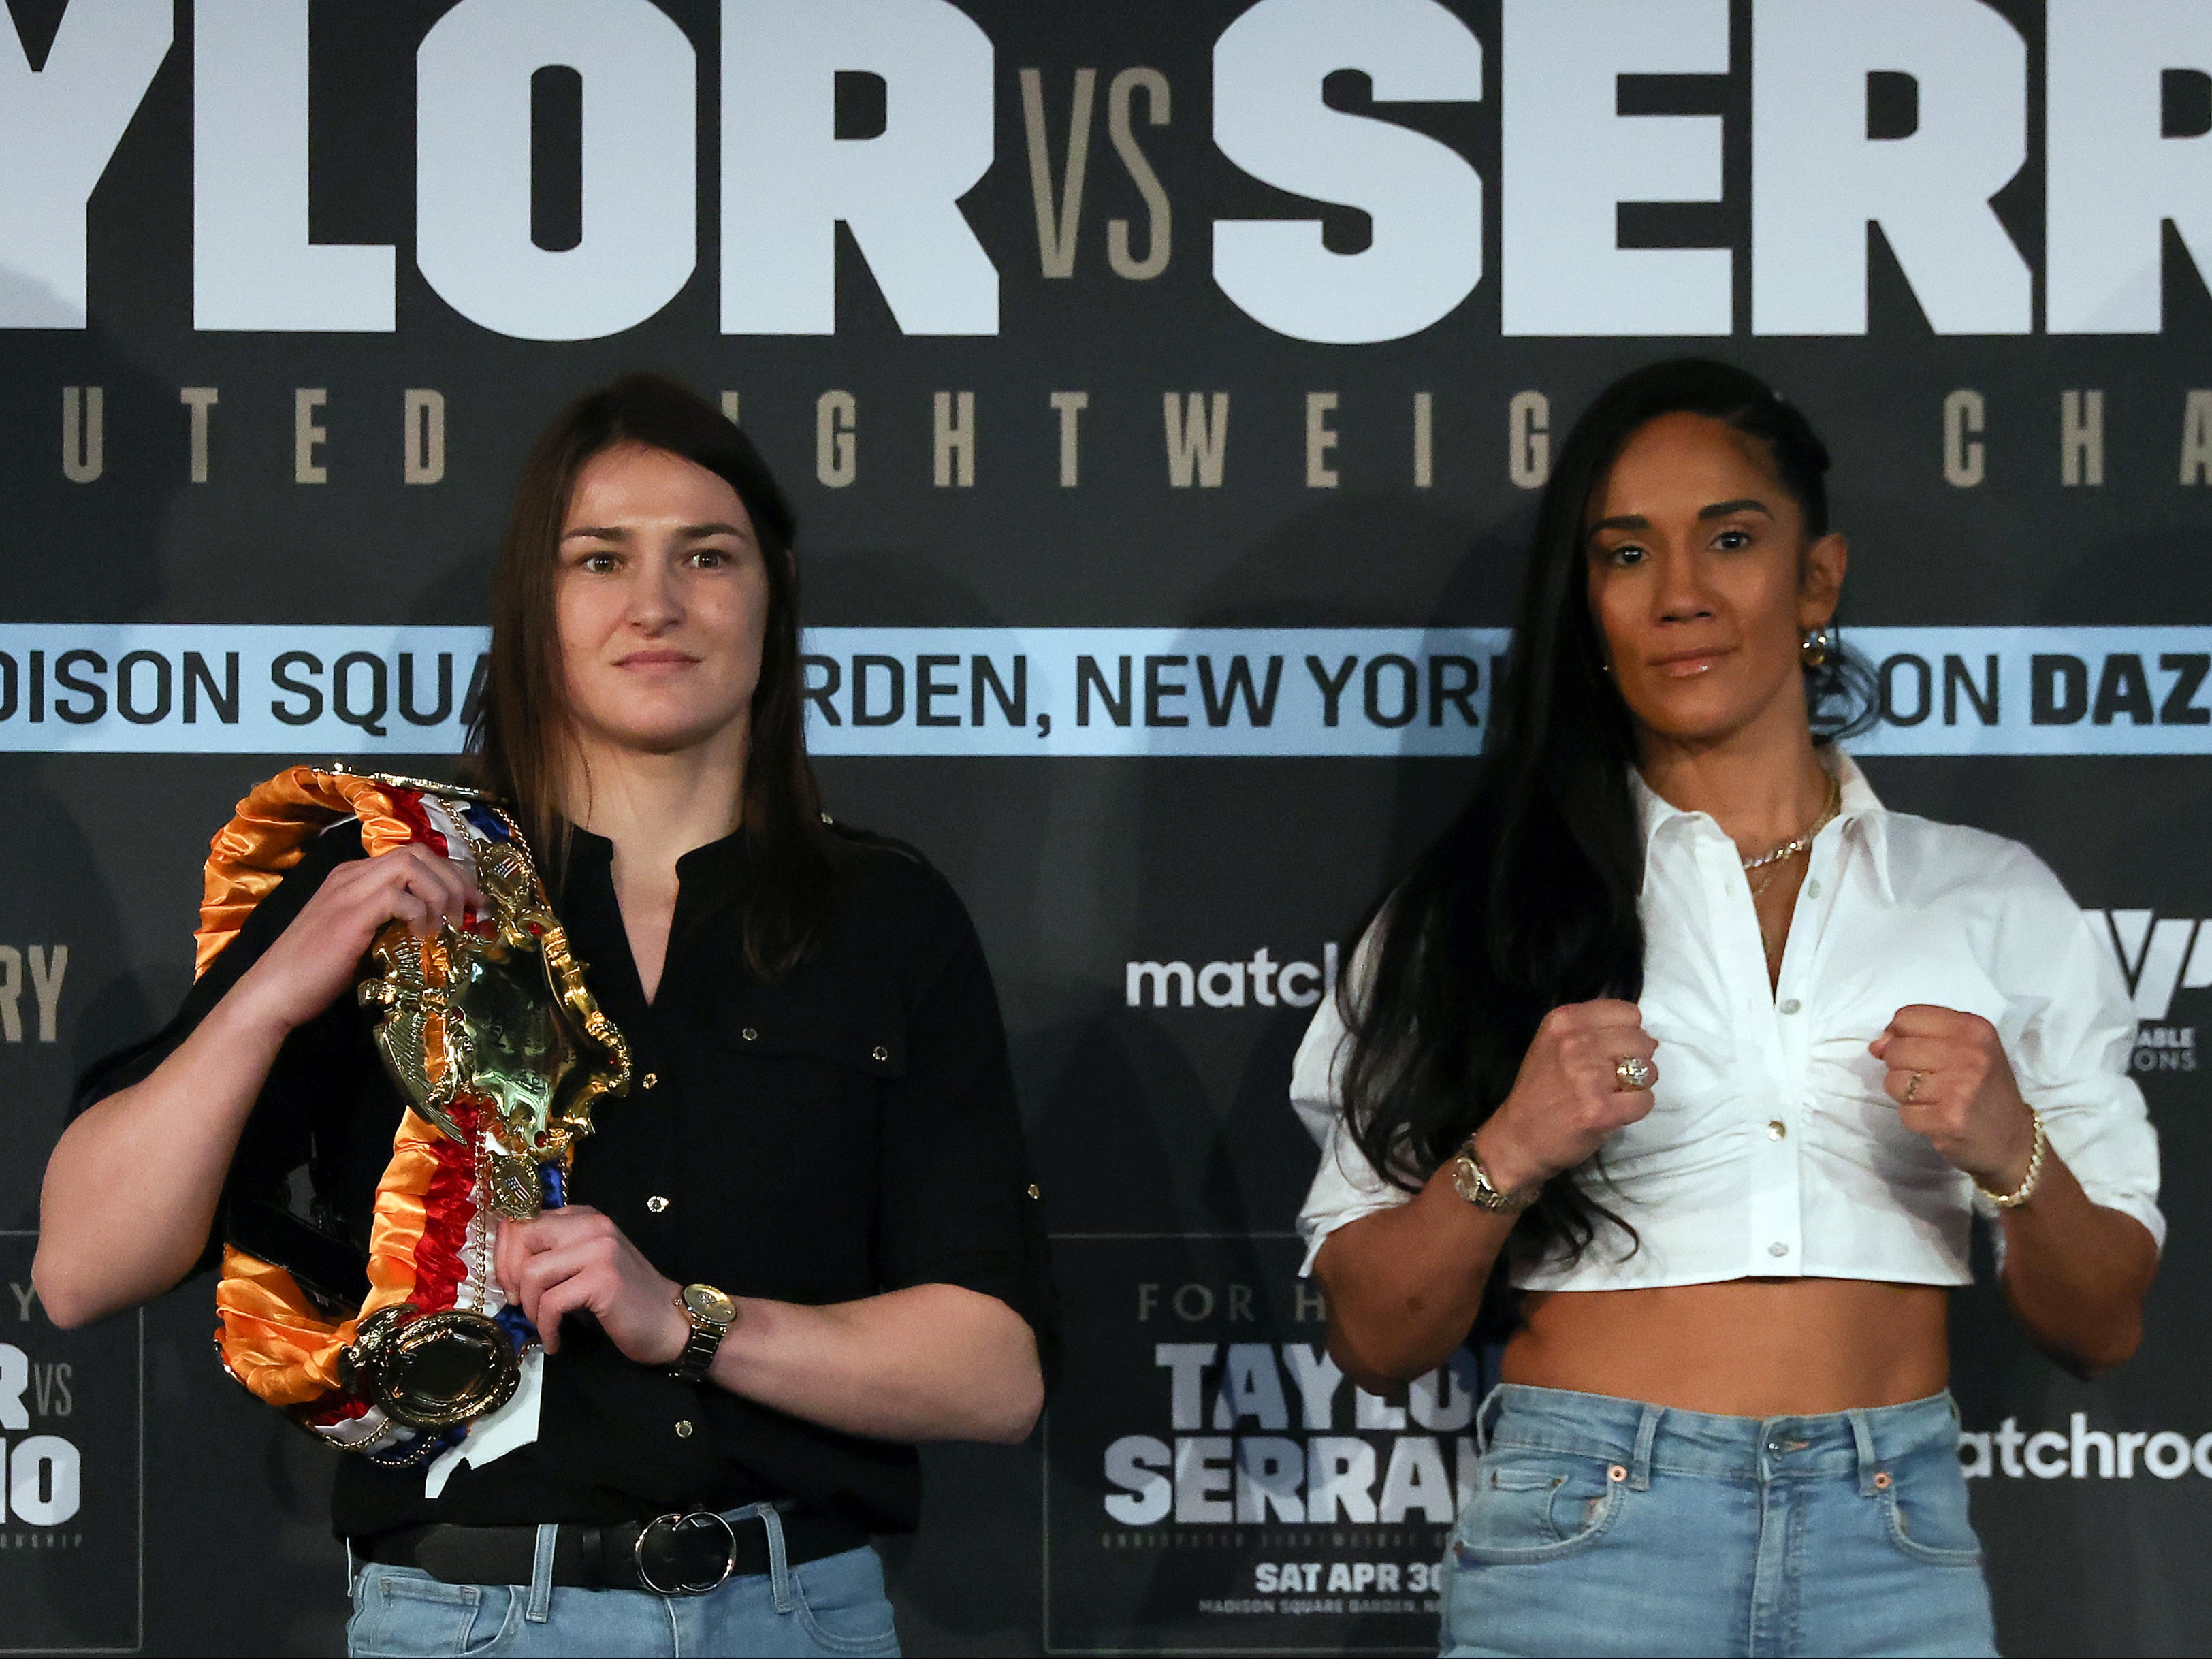 Taylor vs Serrano can launch new era in boxing The Independent